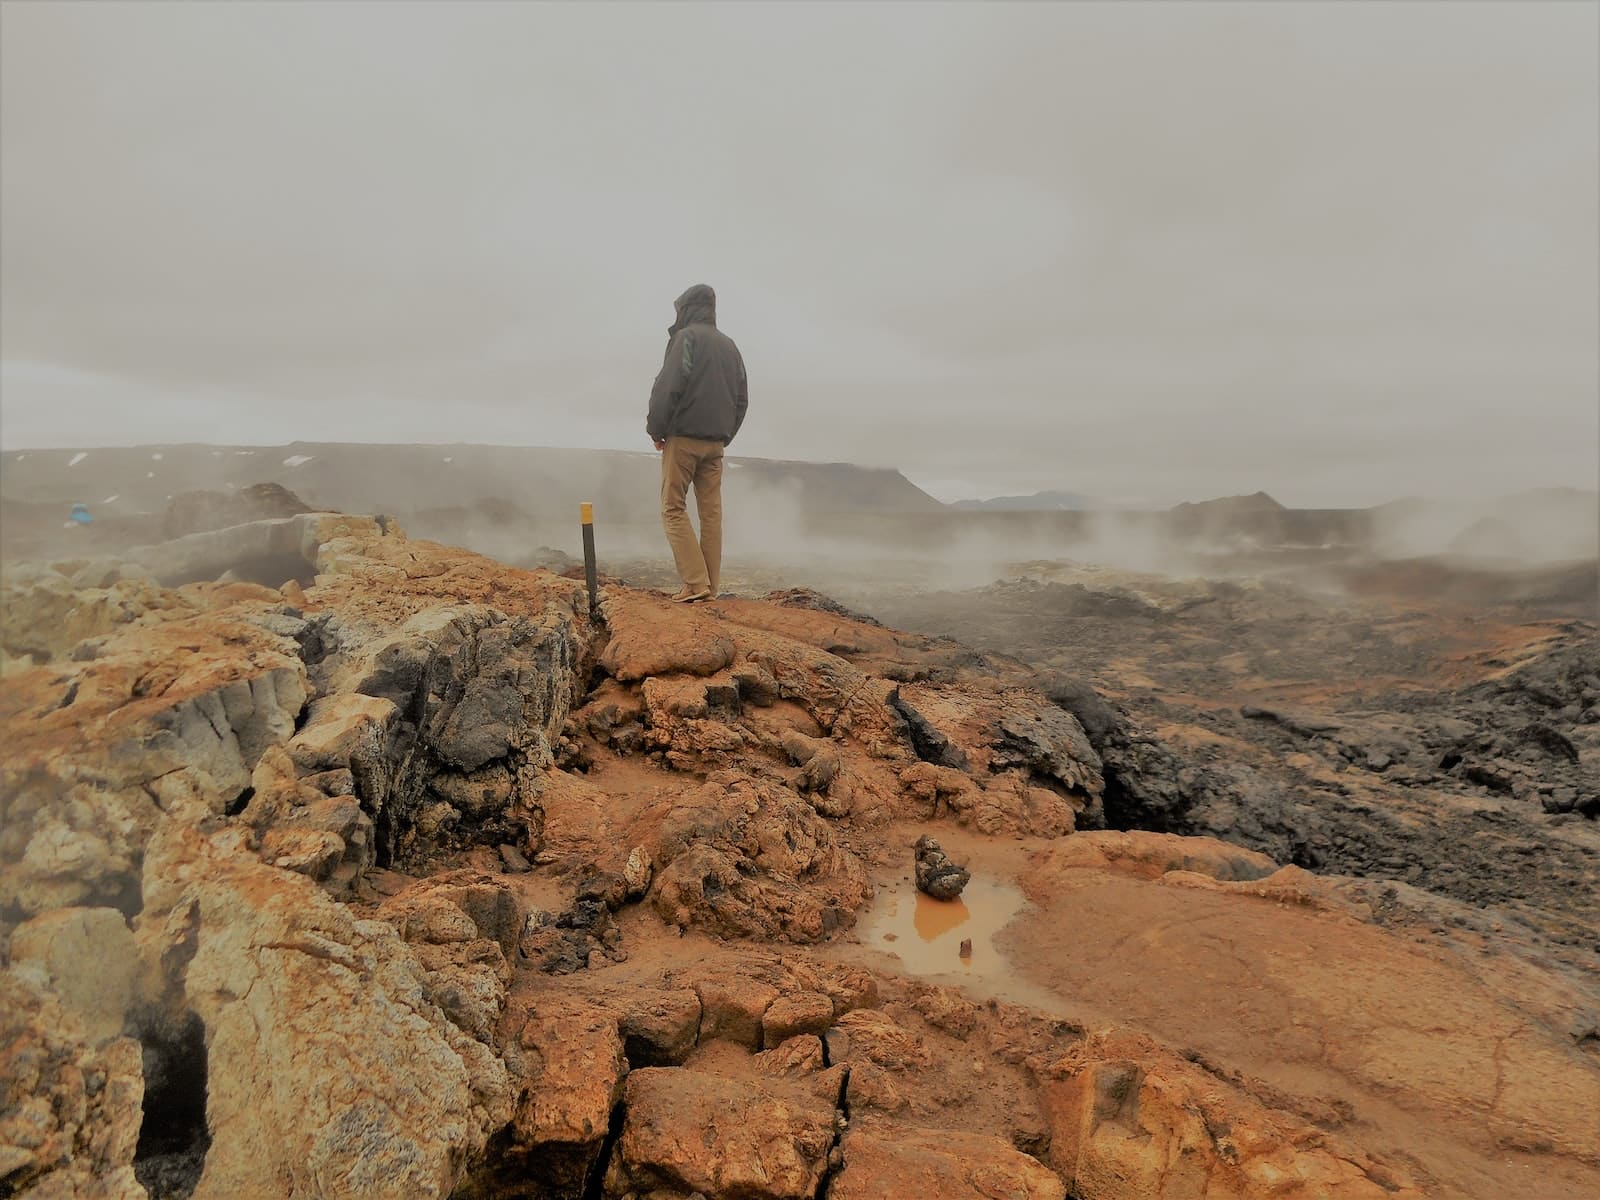 man in black jacket standing on brown rock formation during daytime